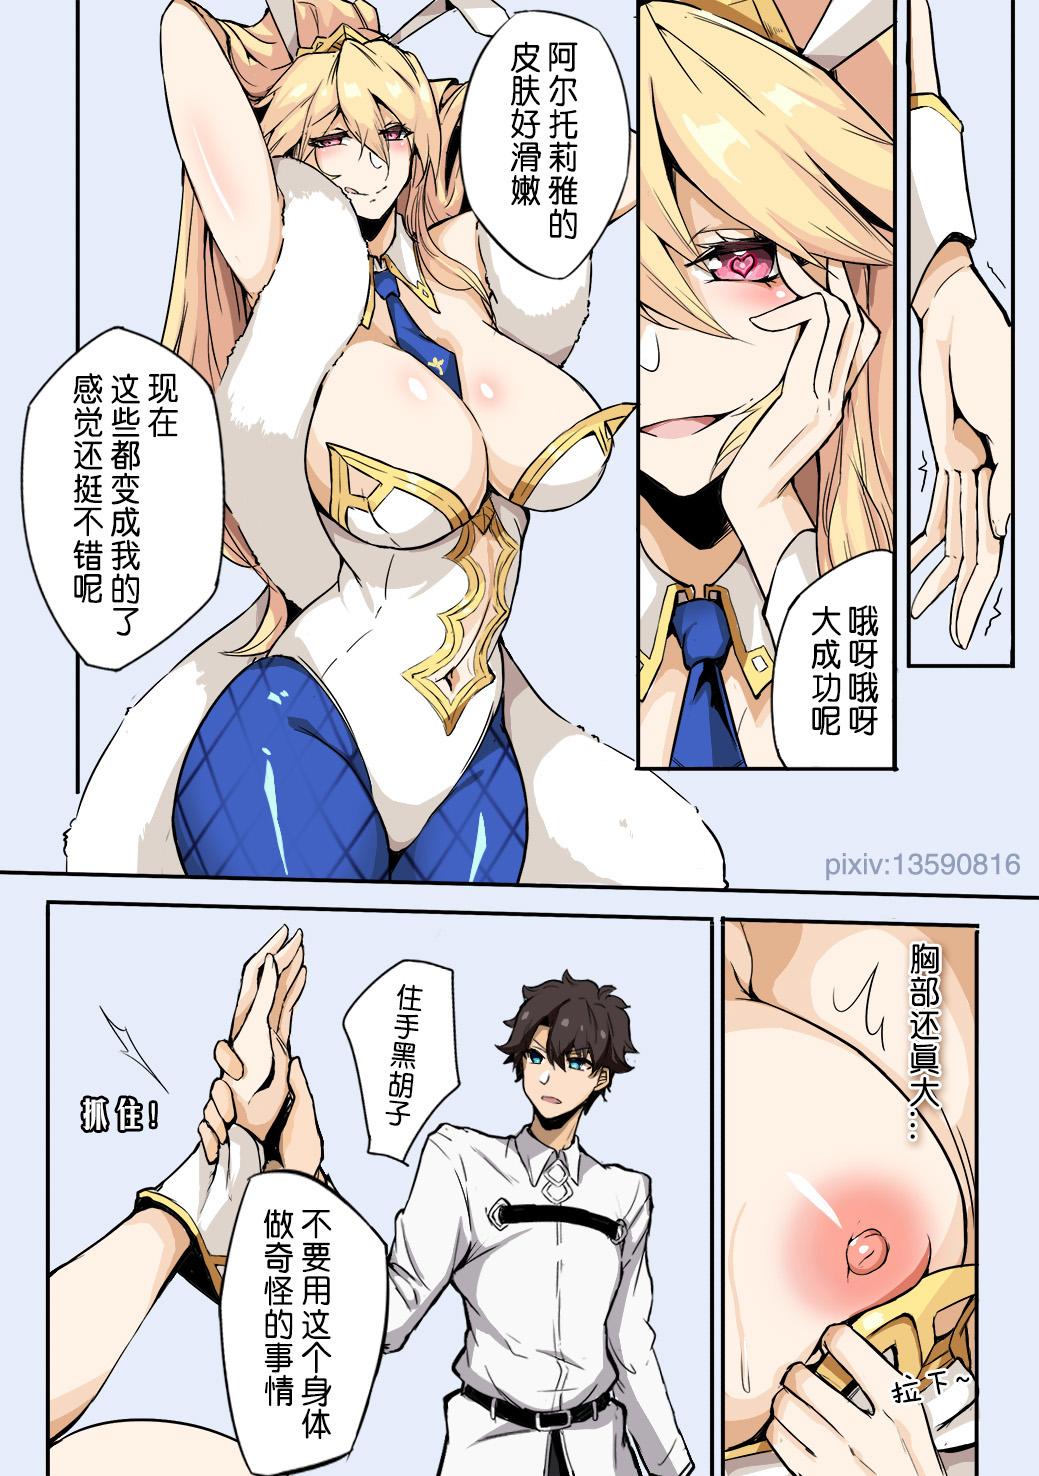 Ass Licking fate 黑胡子的阴谋 - Fate grand order Teen Sex - Page 4